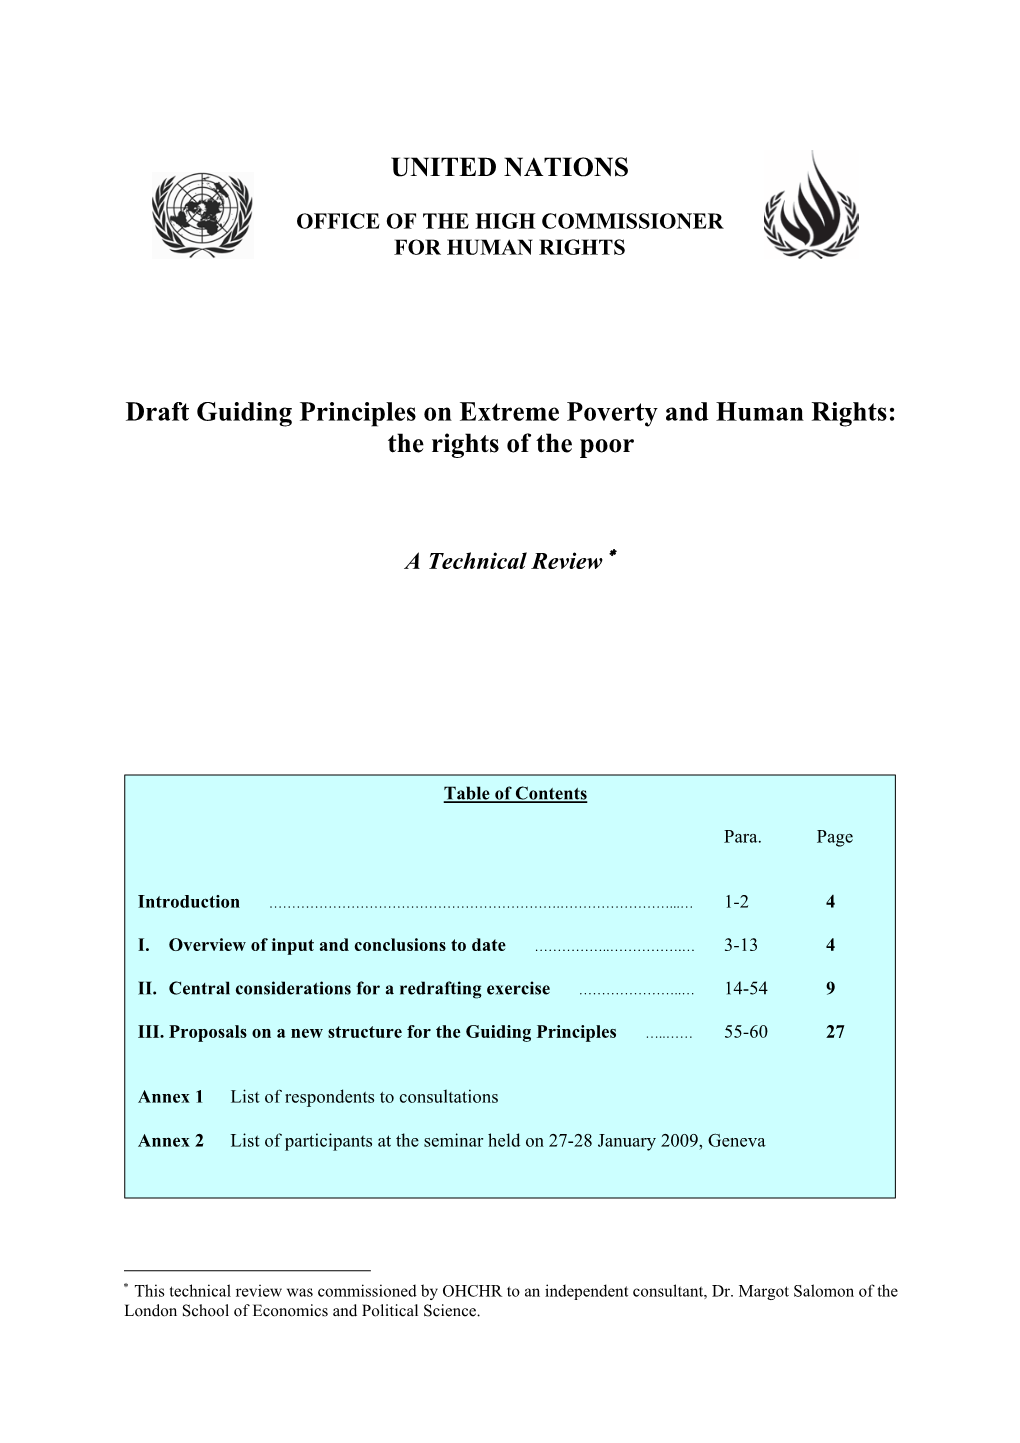 Draft Guiding Principles on Extreme Poverty and Human Rights: the Rights of the Poor